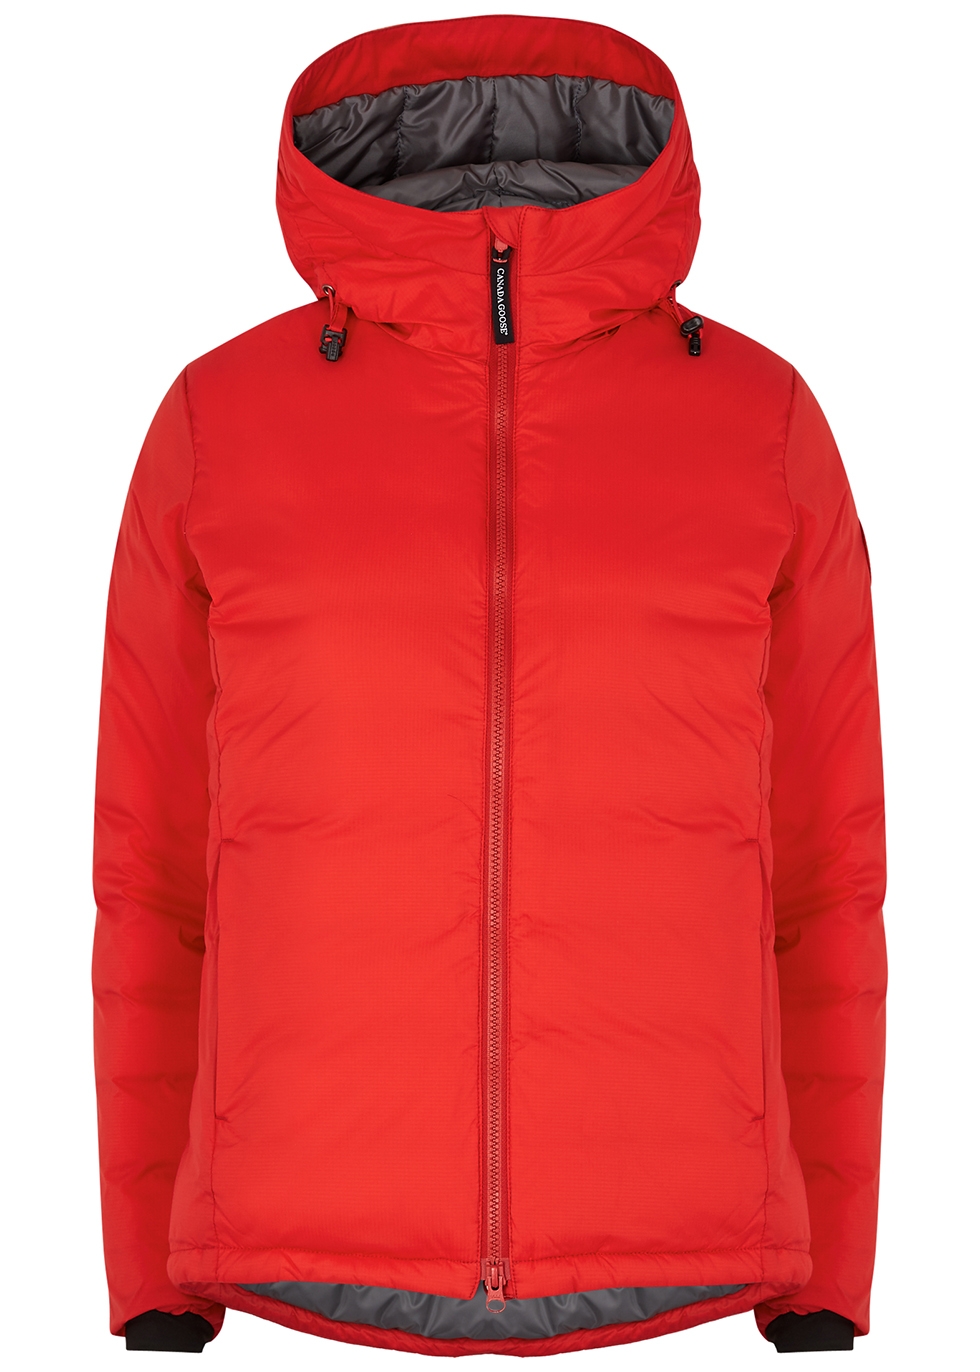 Camp Hoody red padded ripstop jacket